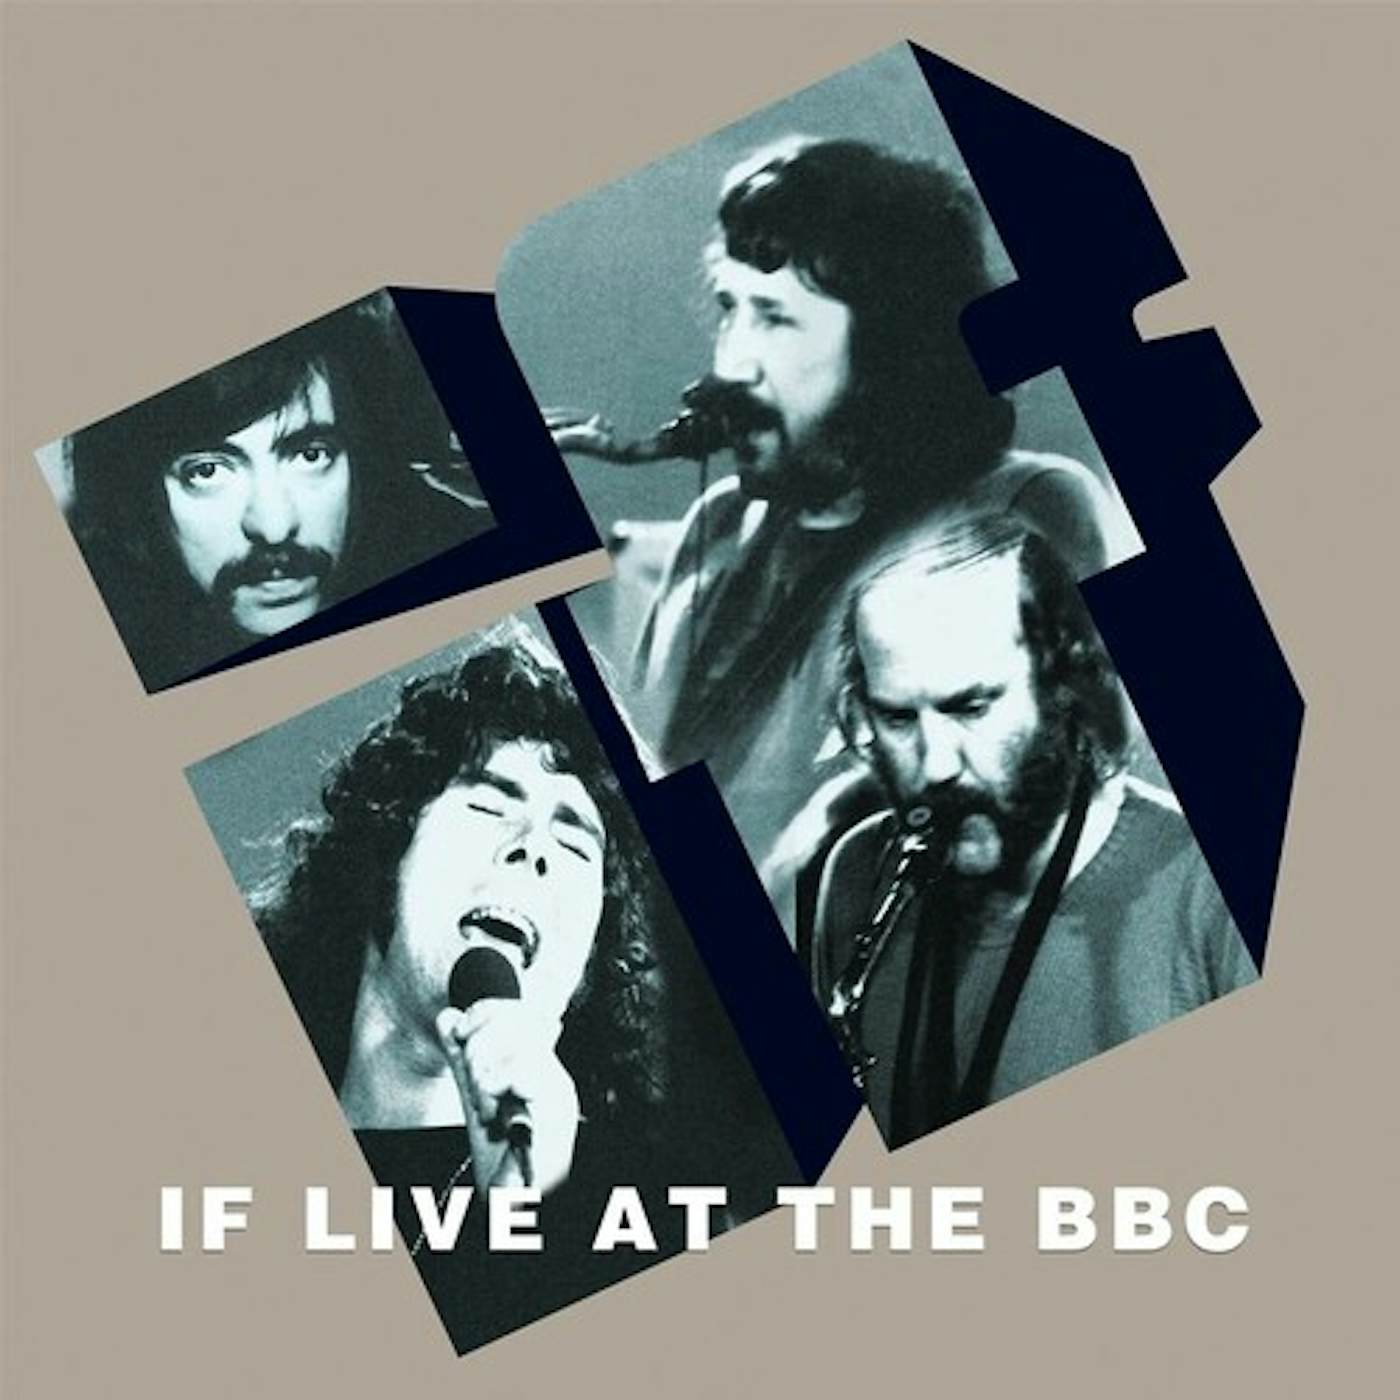 If LIVE AT THE BBC CD